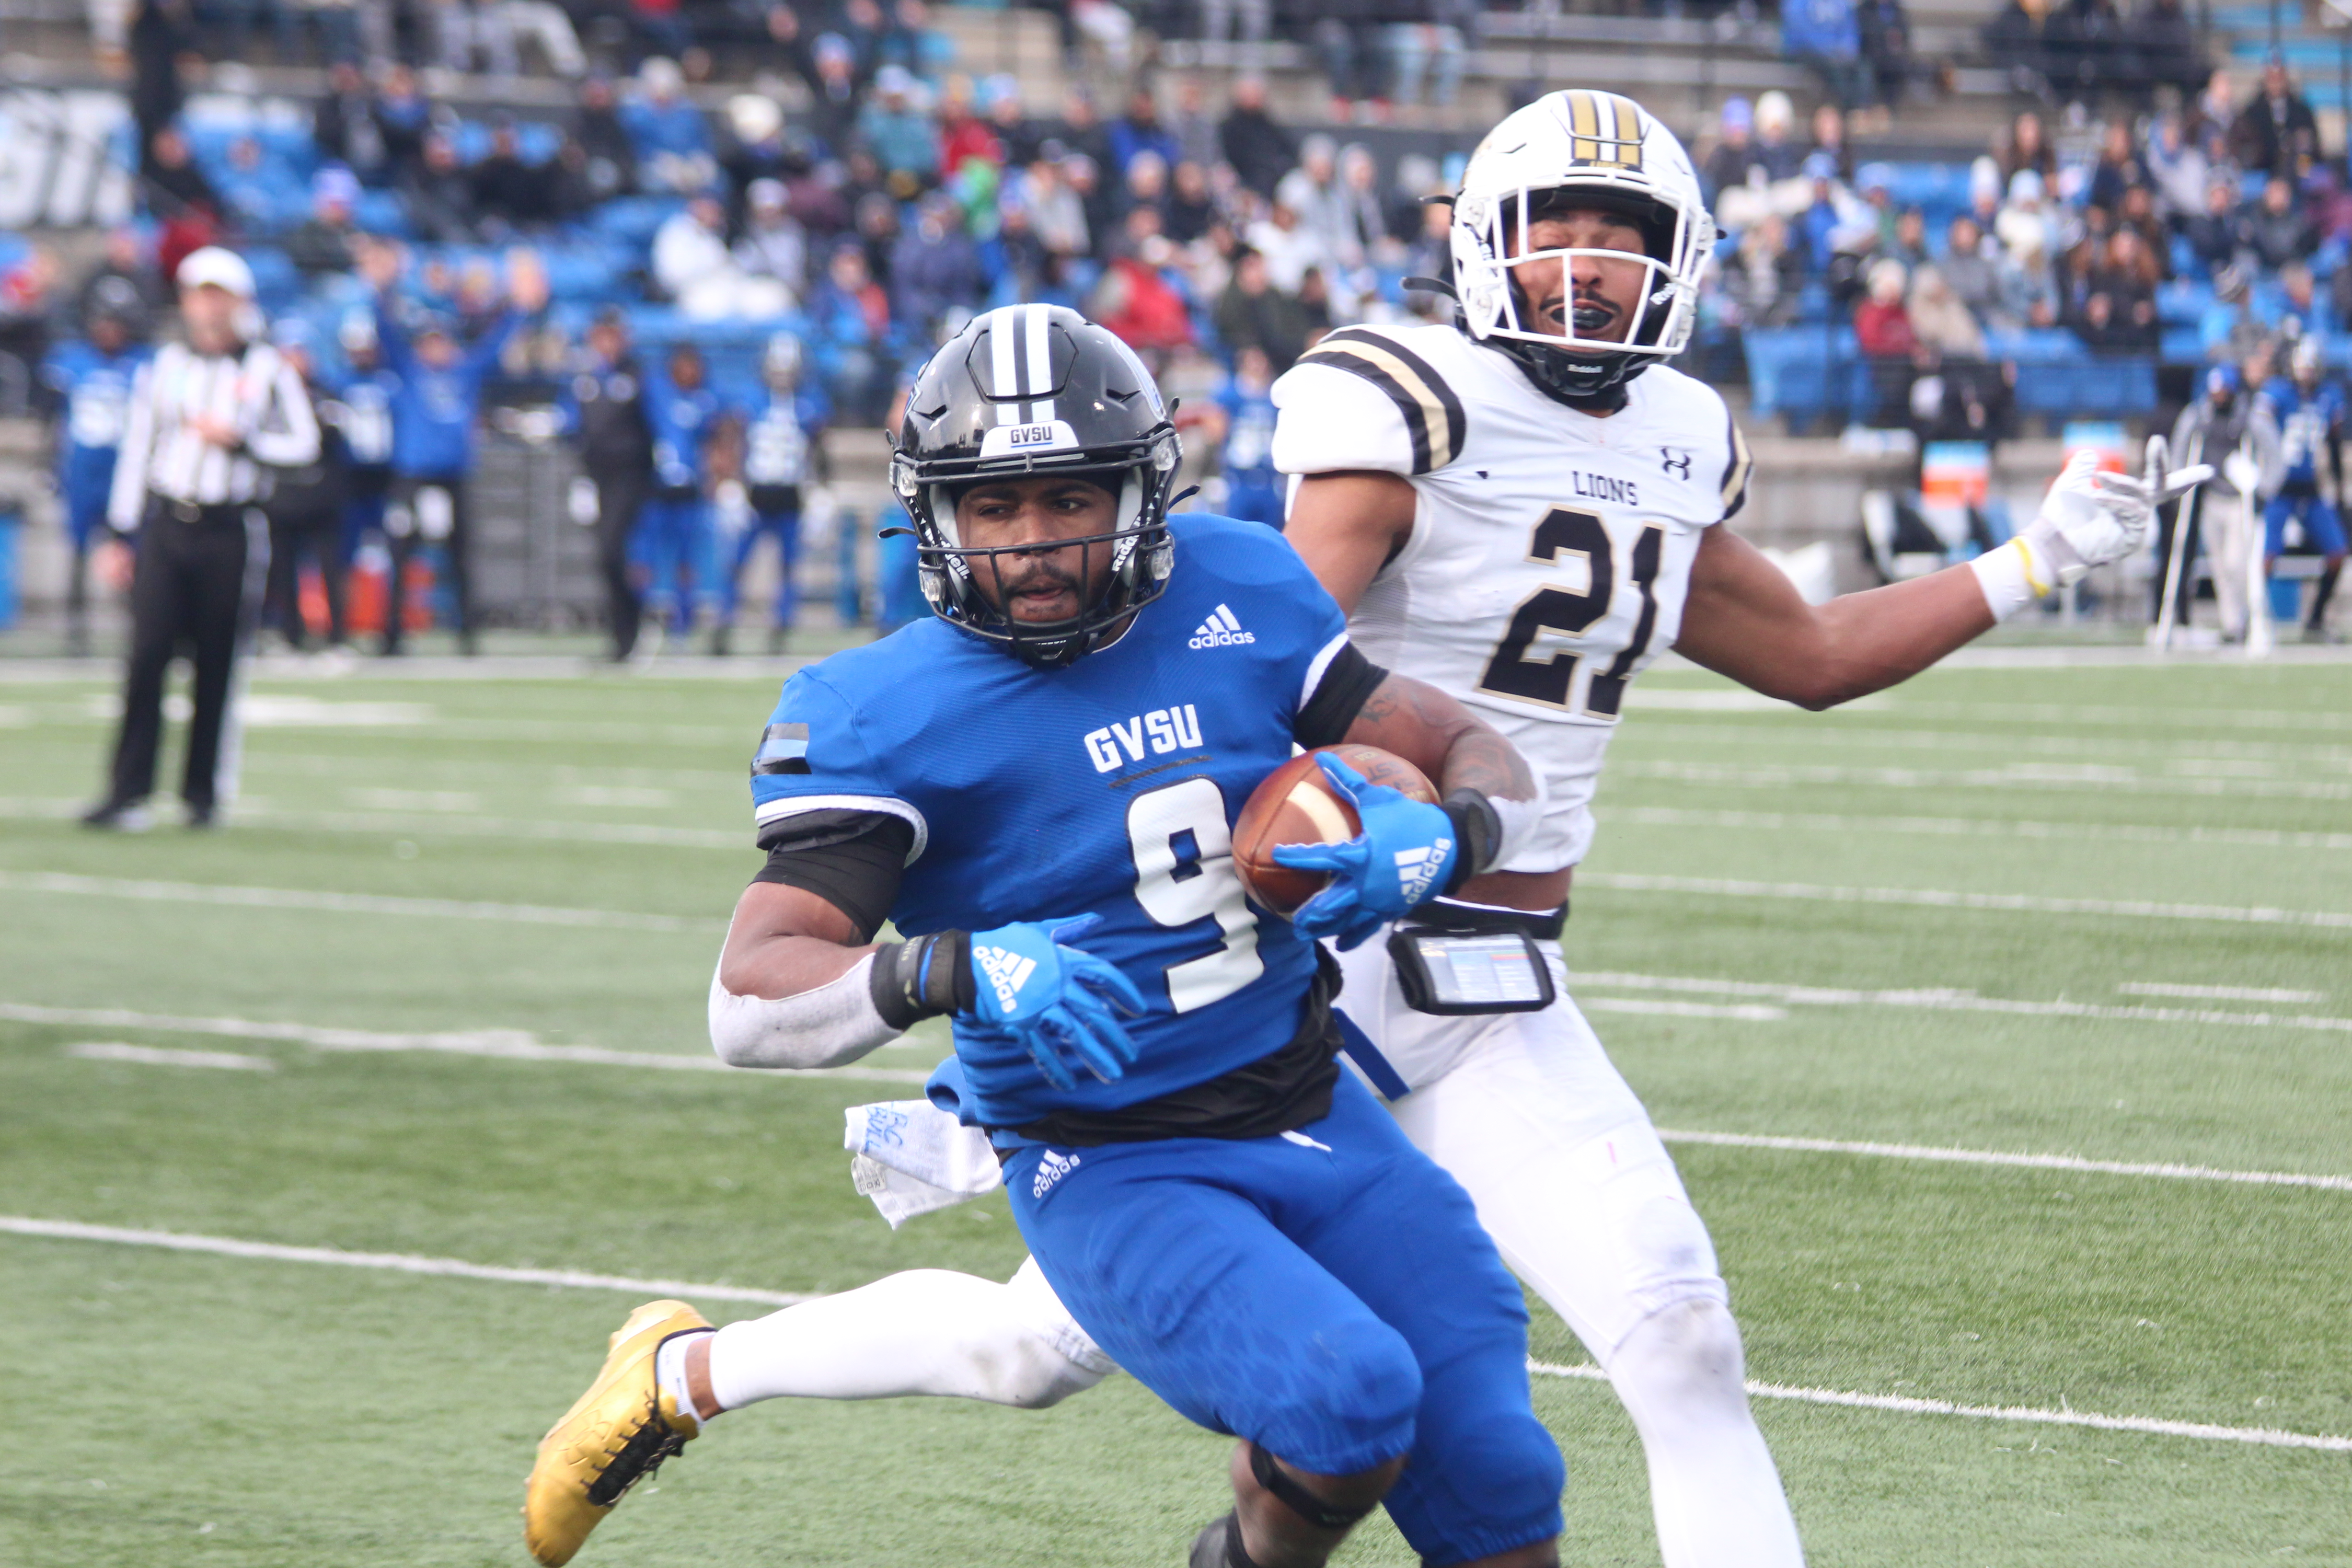 LISTEN: Recapping GVSU's playoff game, Previewing The Game